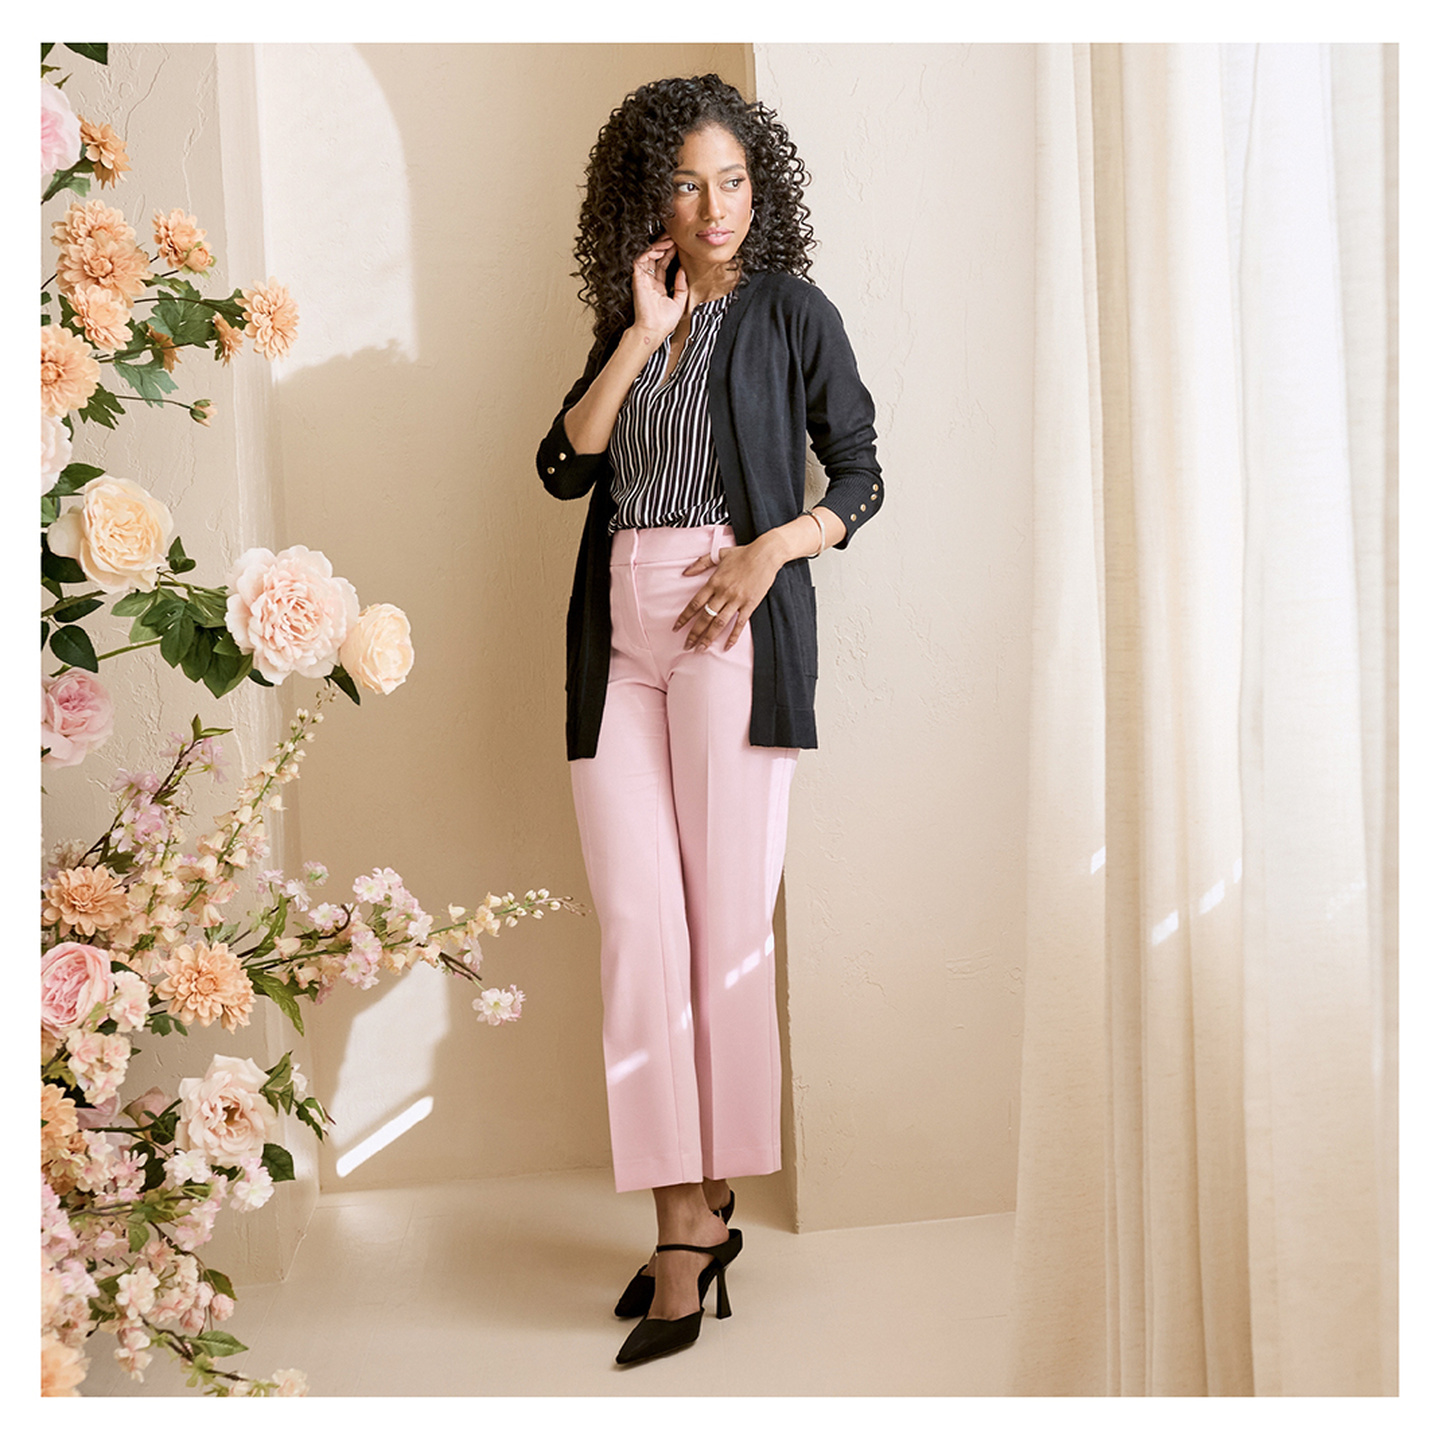 Model in Pink pants and black cardigan